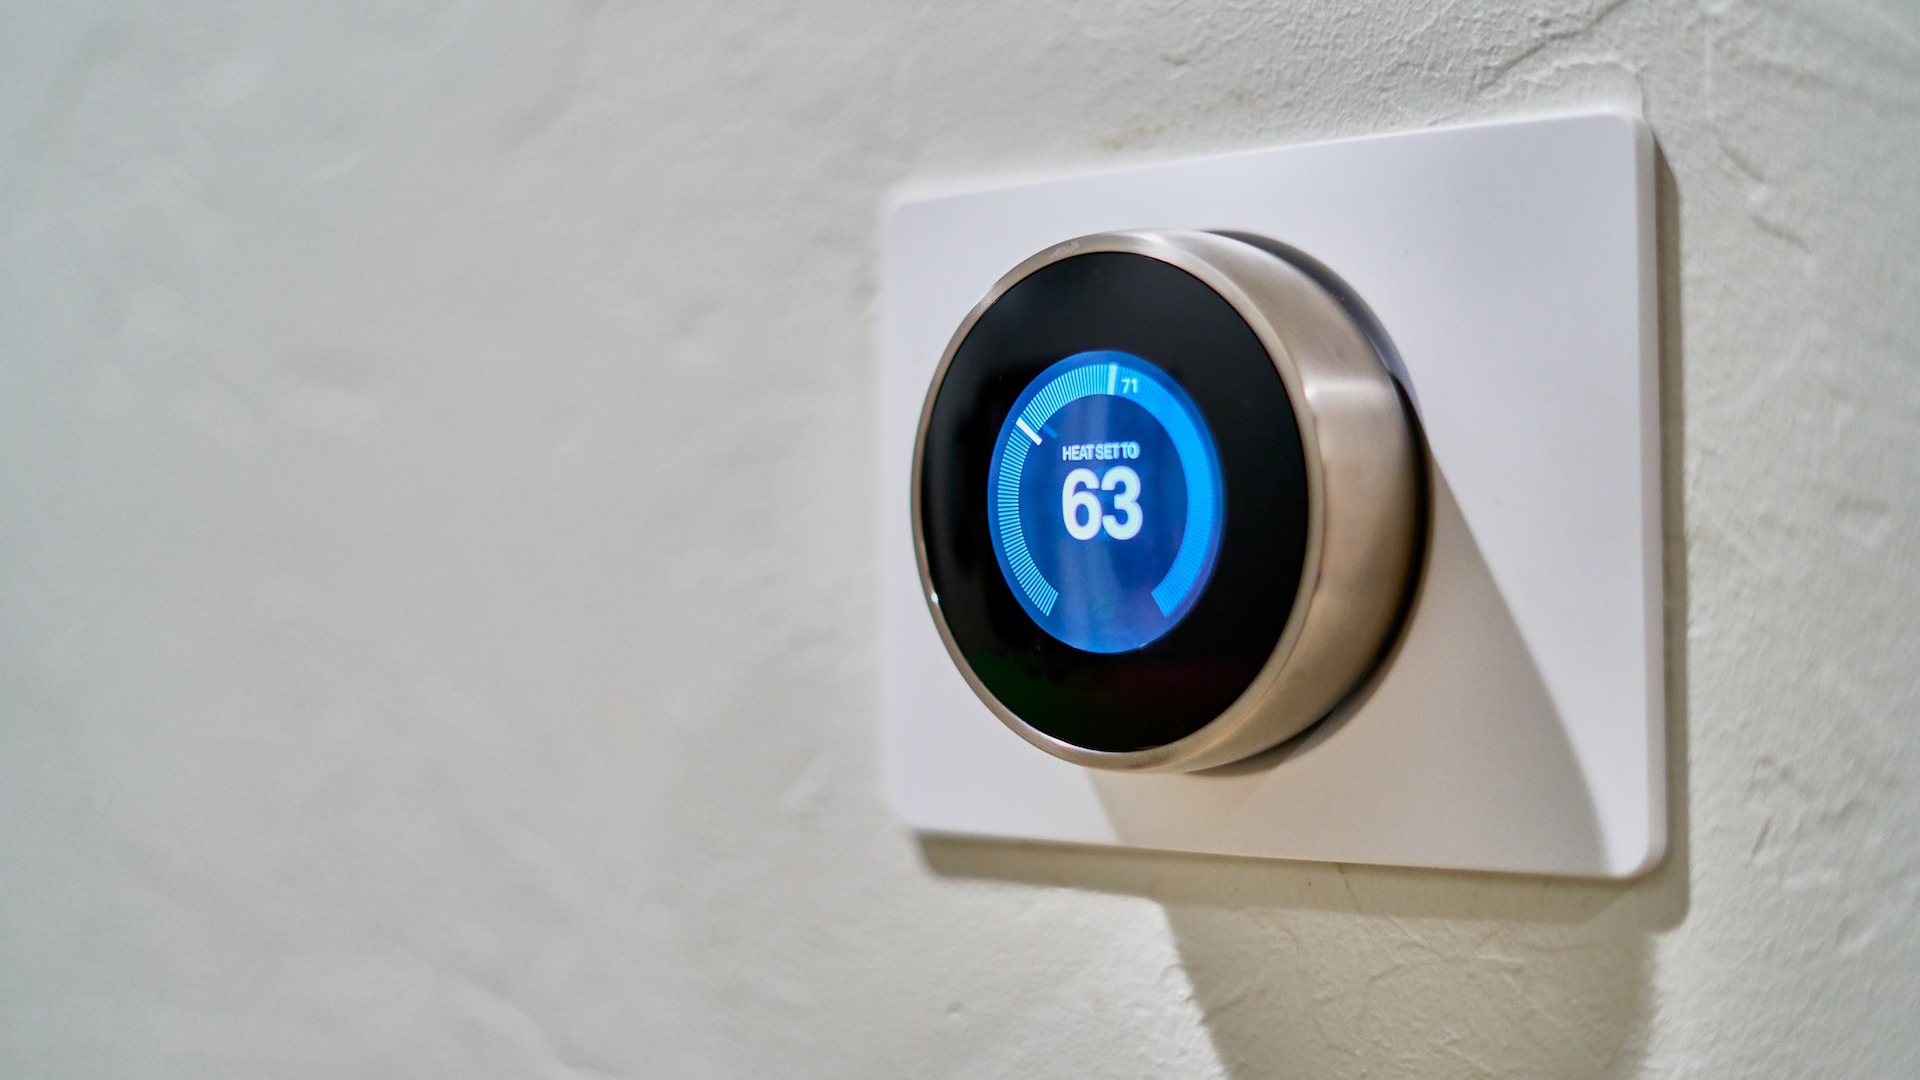 A stock image of a thermostat mounted on a wall.